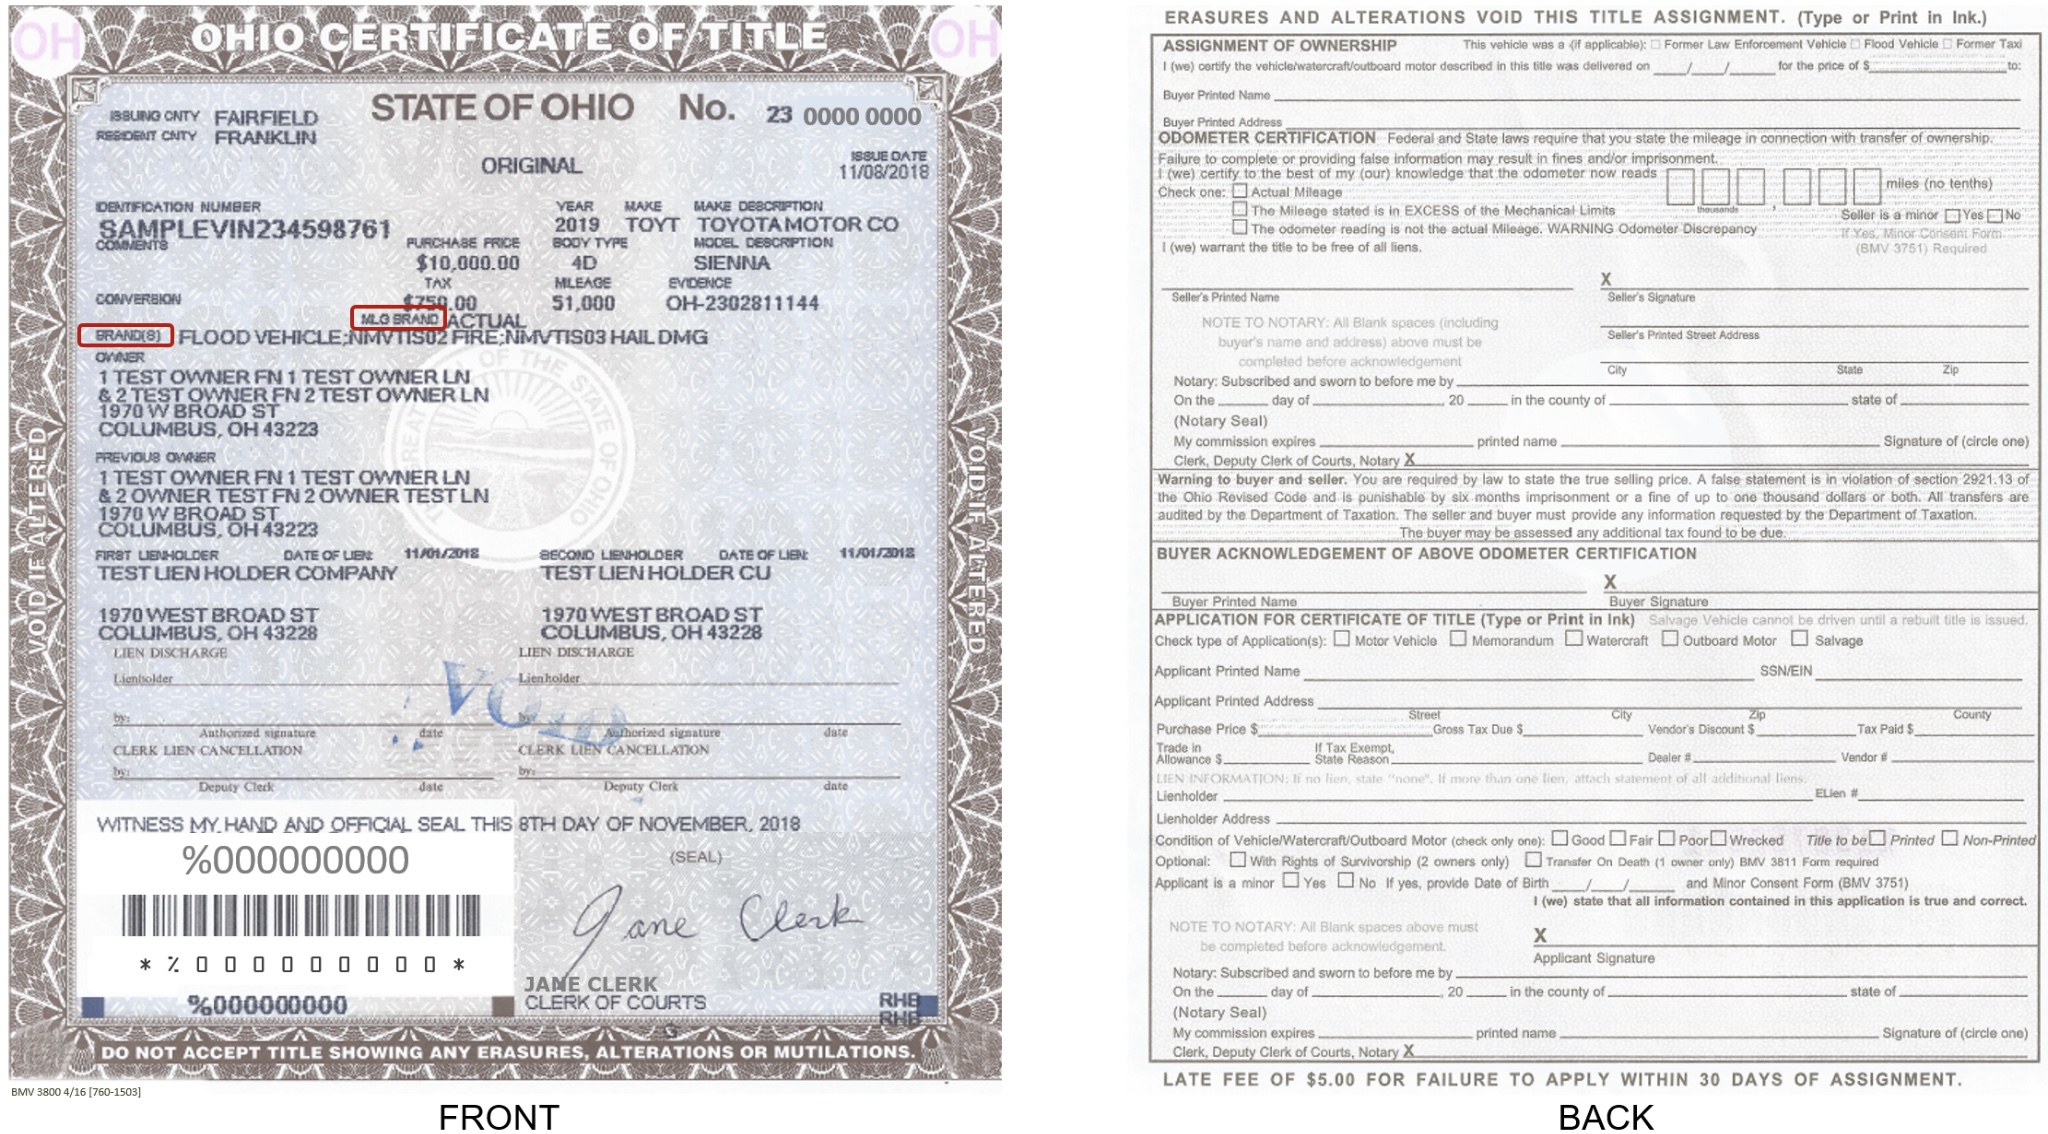 New Ohio certificate of title for motor vehicles and watercraft Meigs